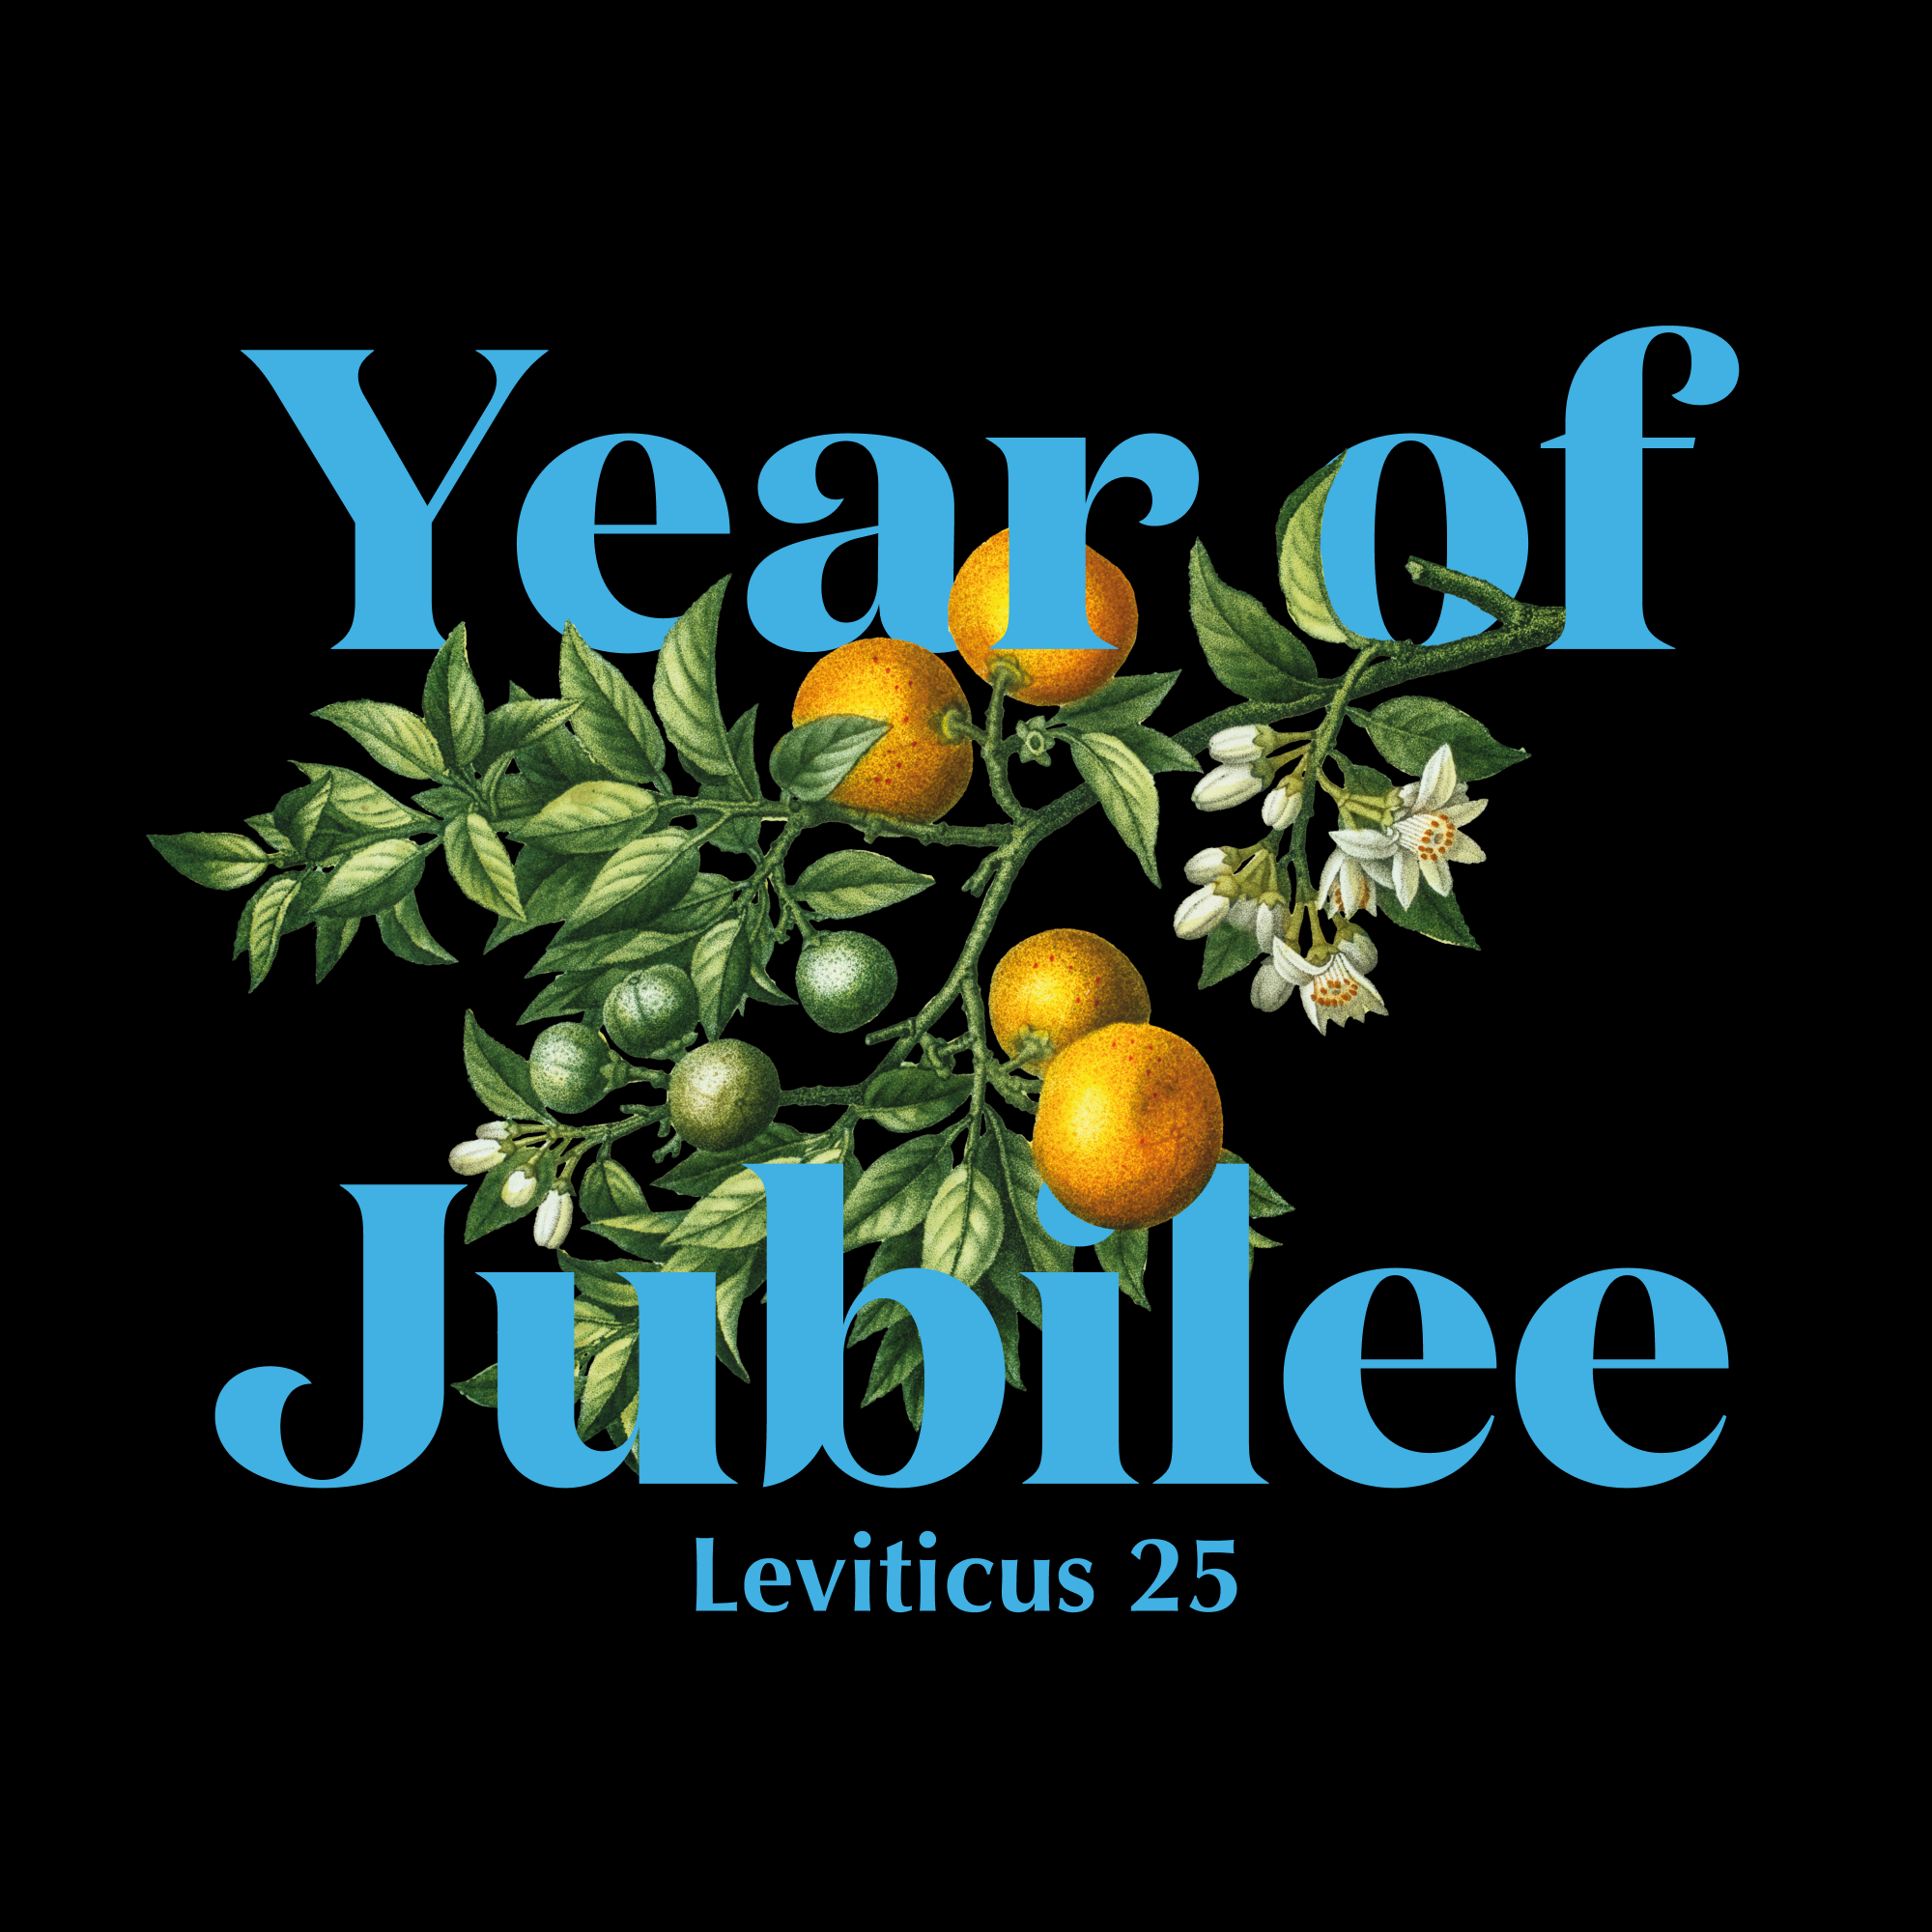 The Year of Jubilee!